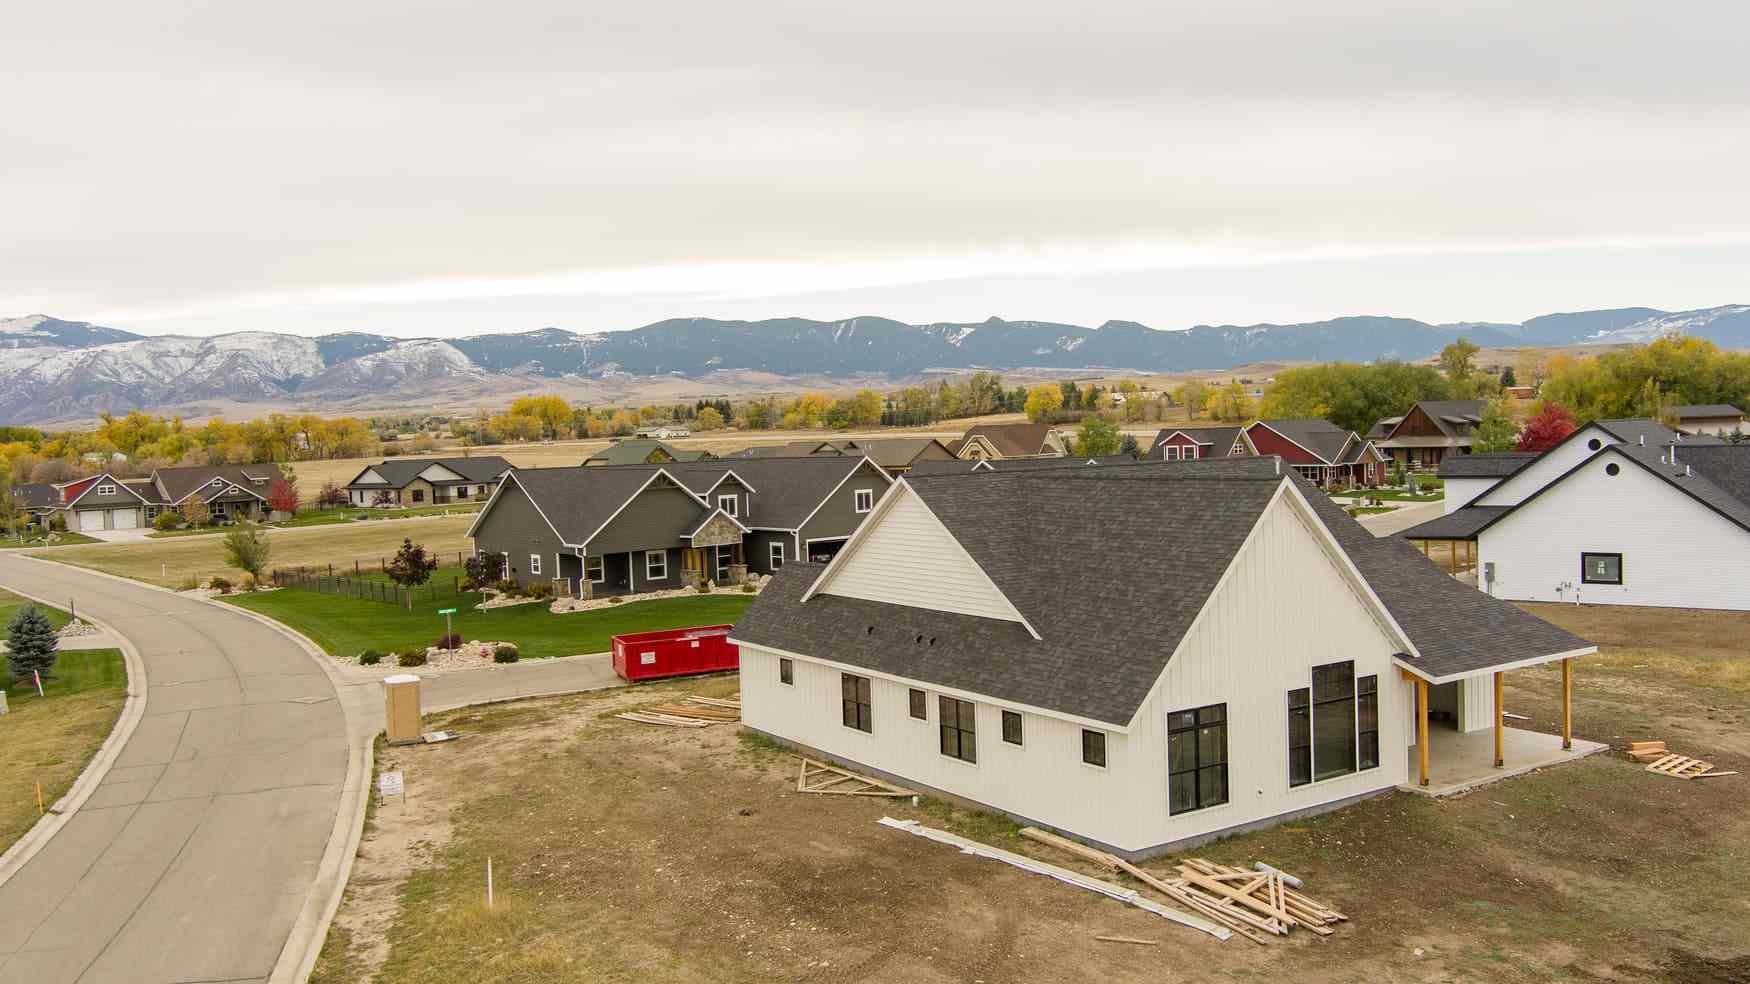 Outside Drone View of Custom Home Being Completed in Wyoming Neighborhood